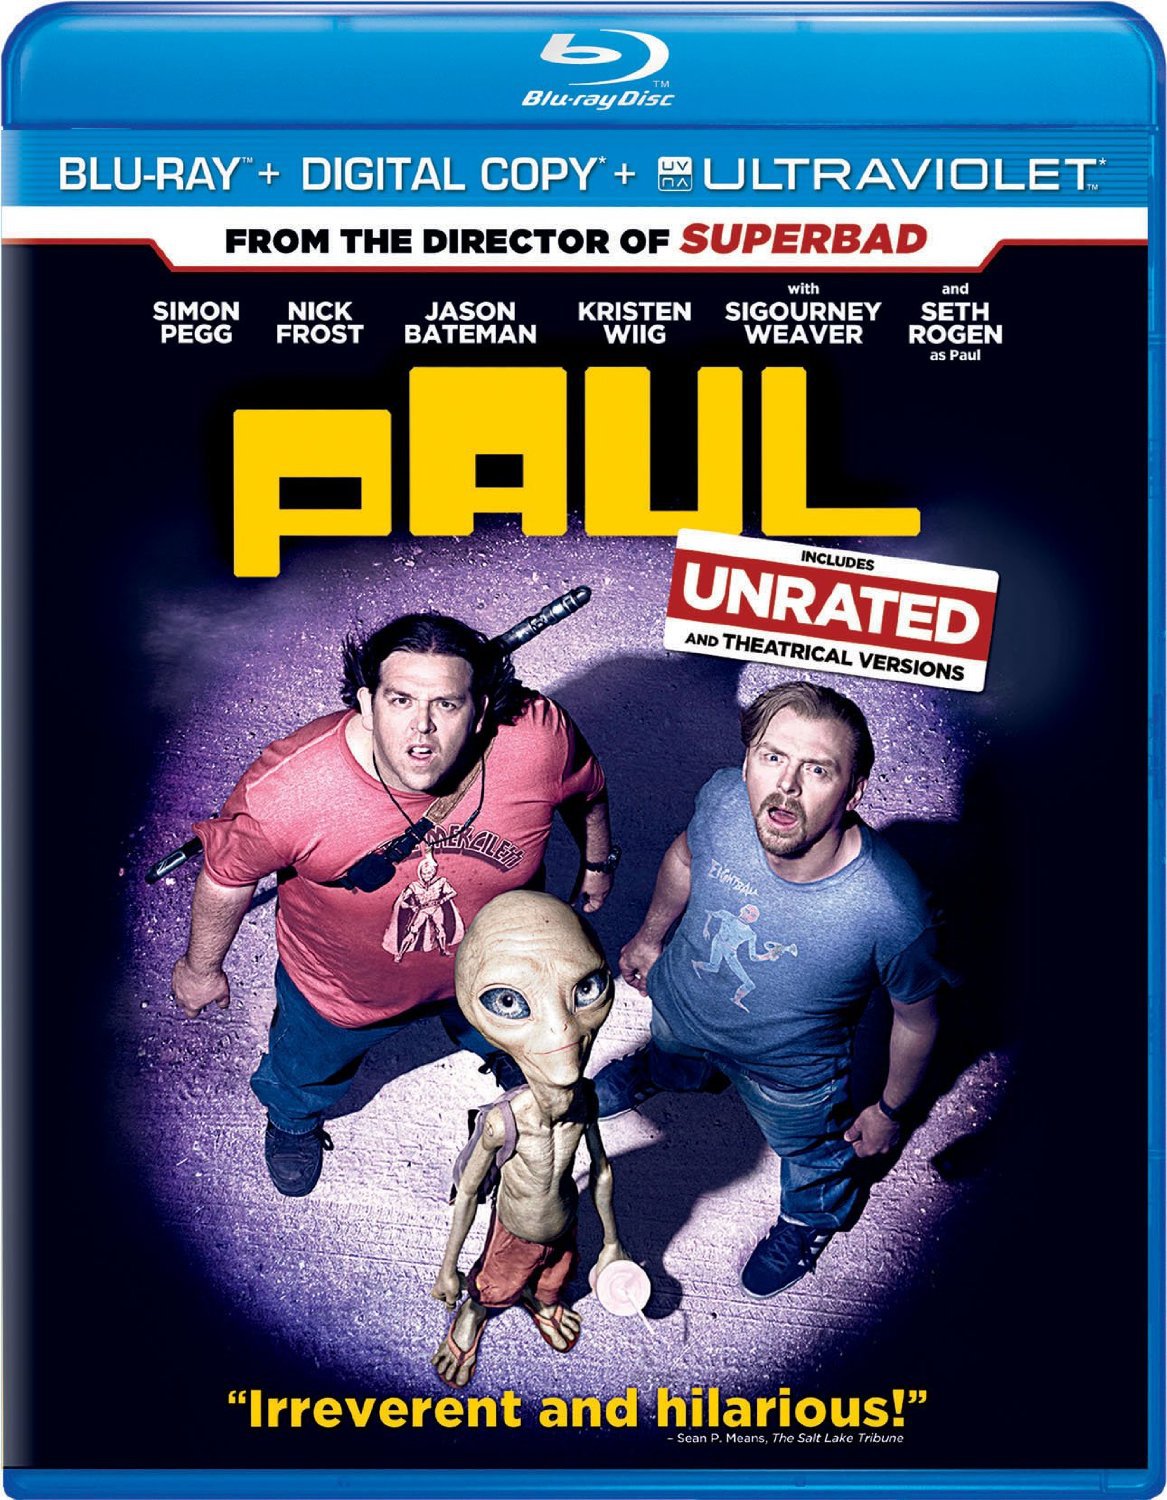 Paul Unrated